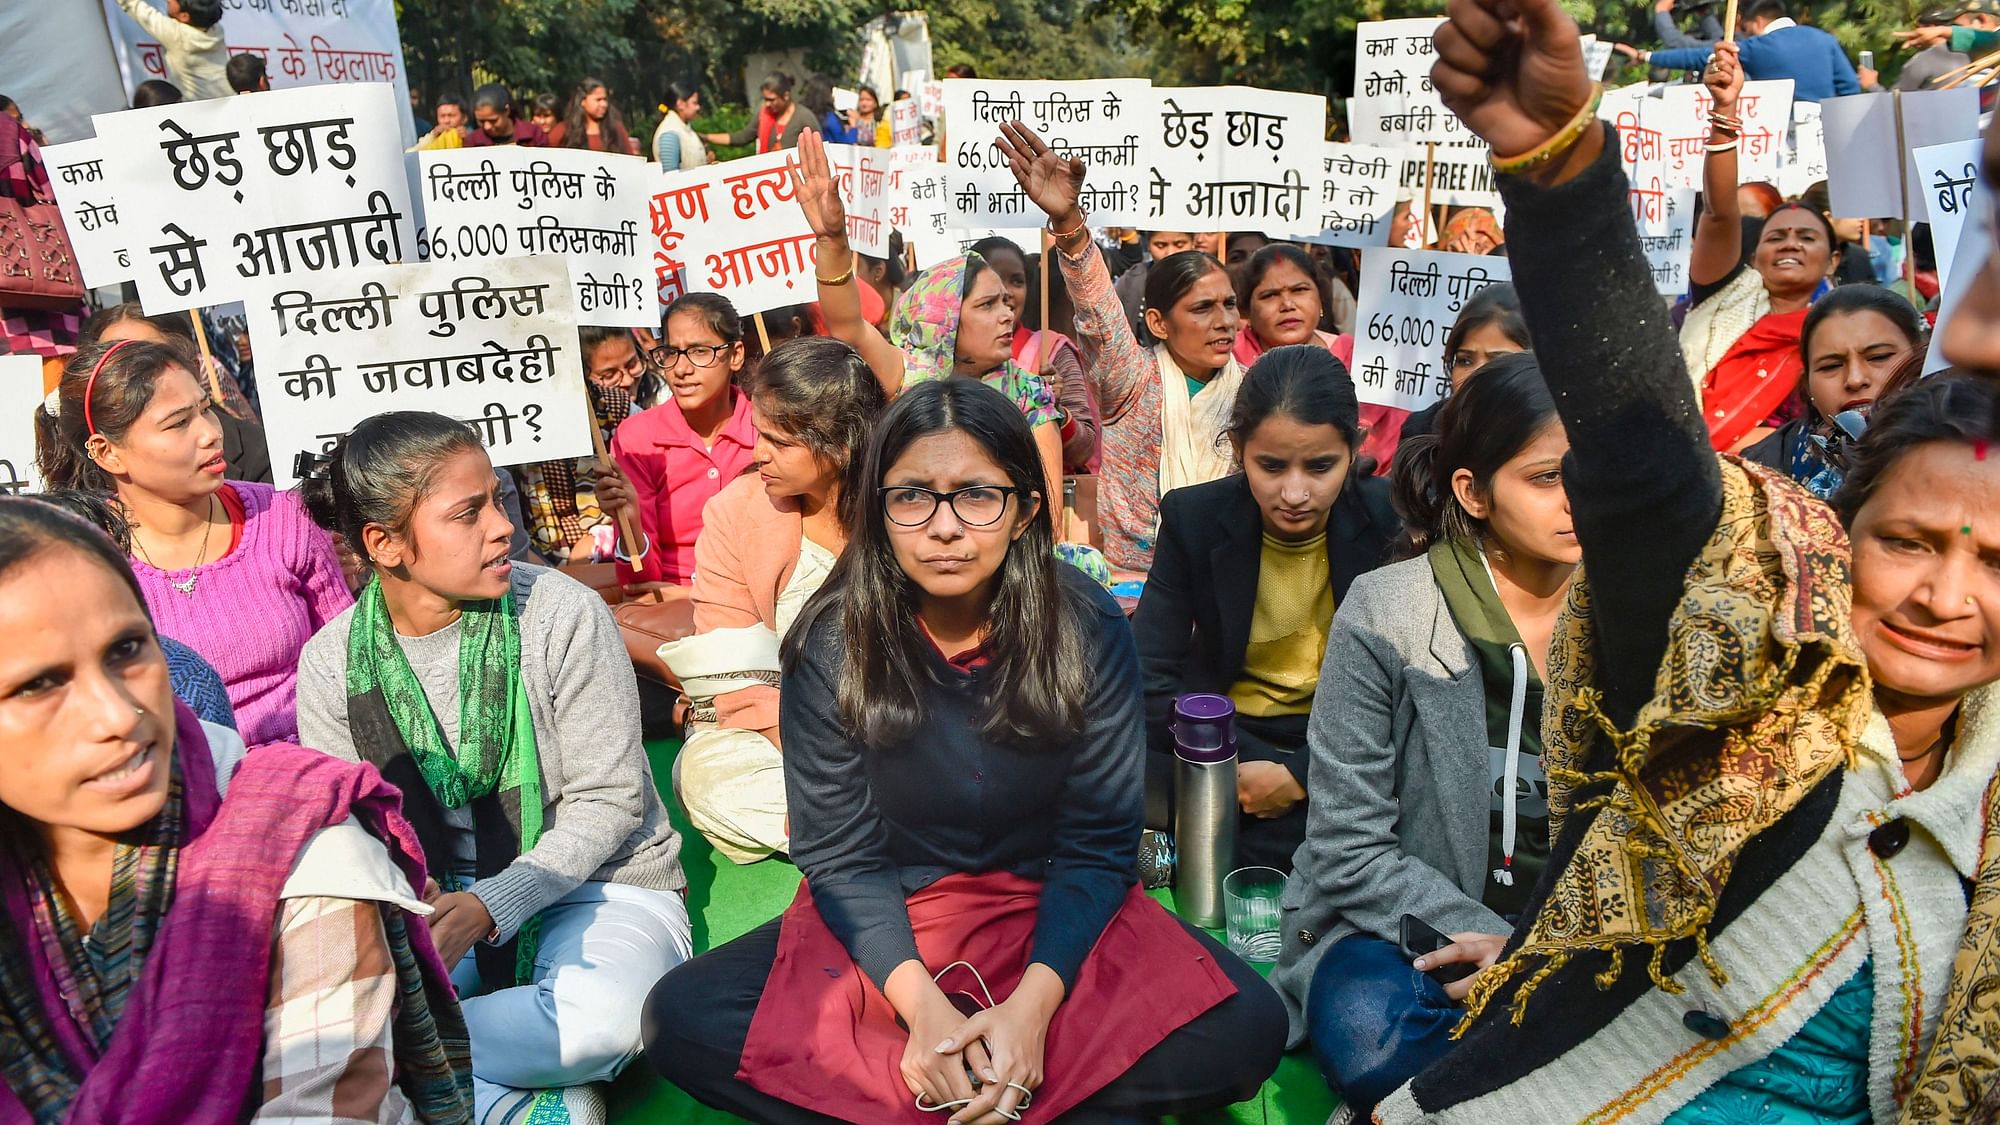 DCW Chairperson Swati Maliwal continues her hunger strike demanding that the rapists in the Hyderabad rape and murder case be hanged, within six months of conviction.&nbsp;